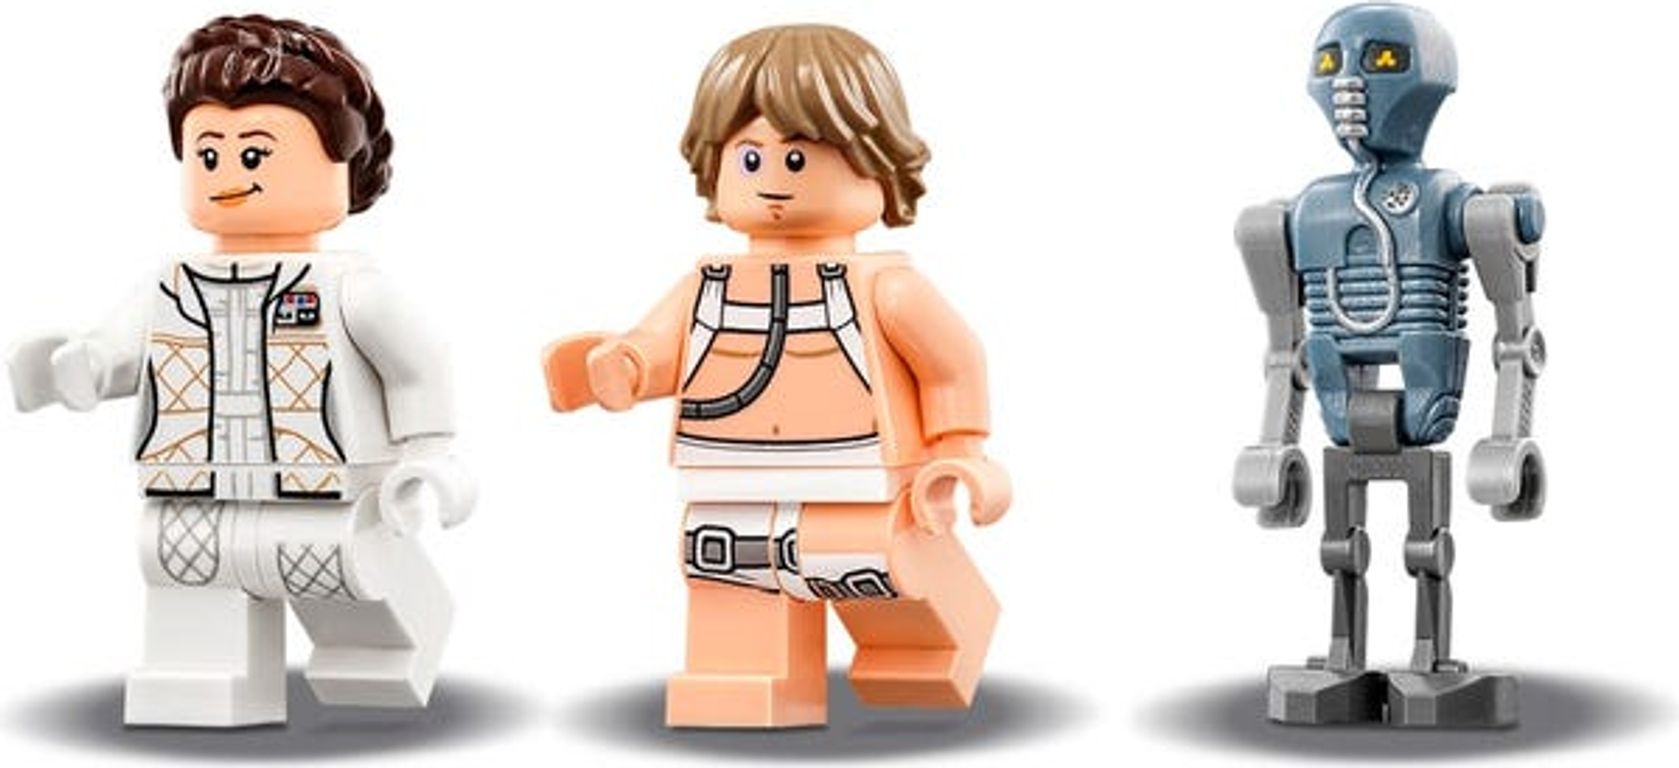 LEGO® Star Wars Hoth Medical Chamber minifigures